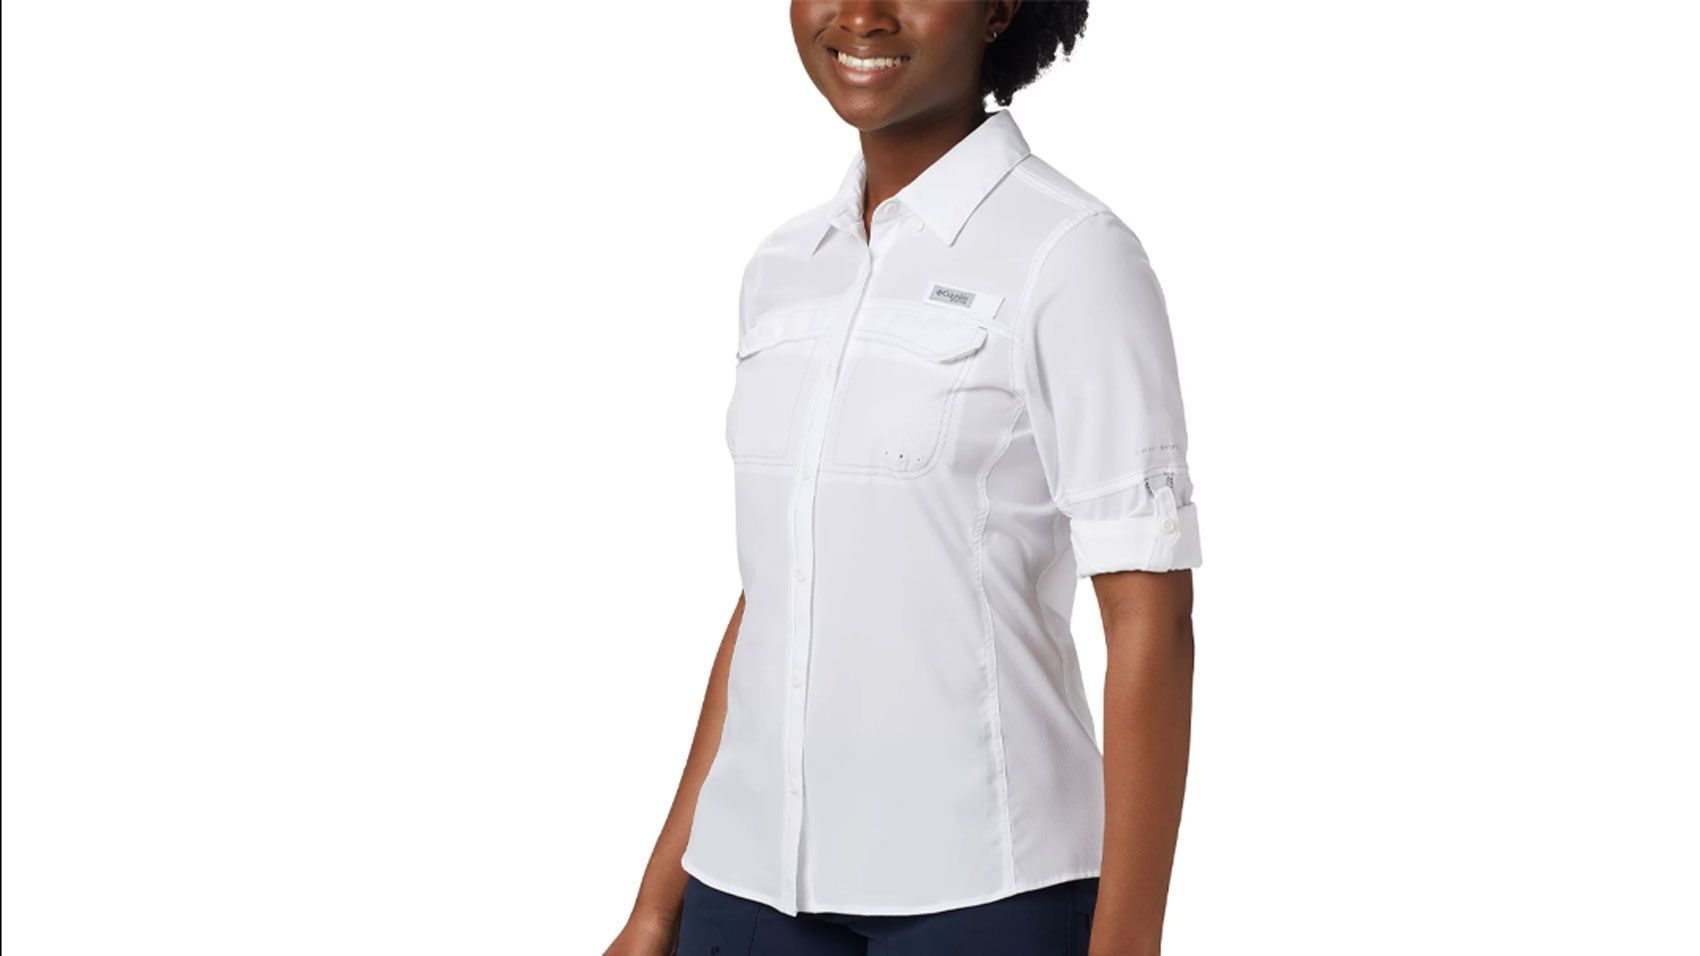 Women's Wrinkle-Free Travel Tops  Wrinkle-Free Tops for Traveling –  Anatomie